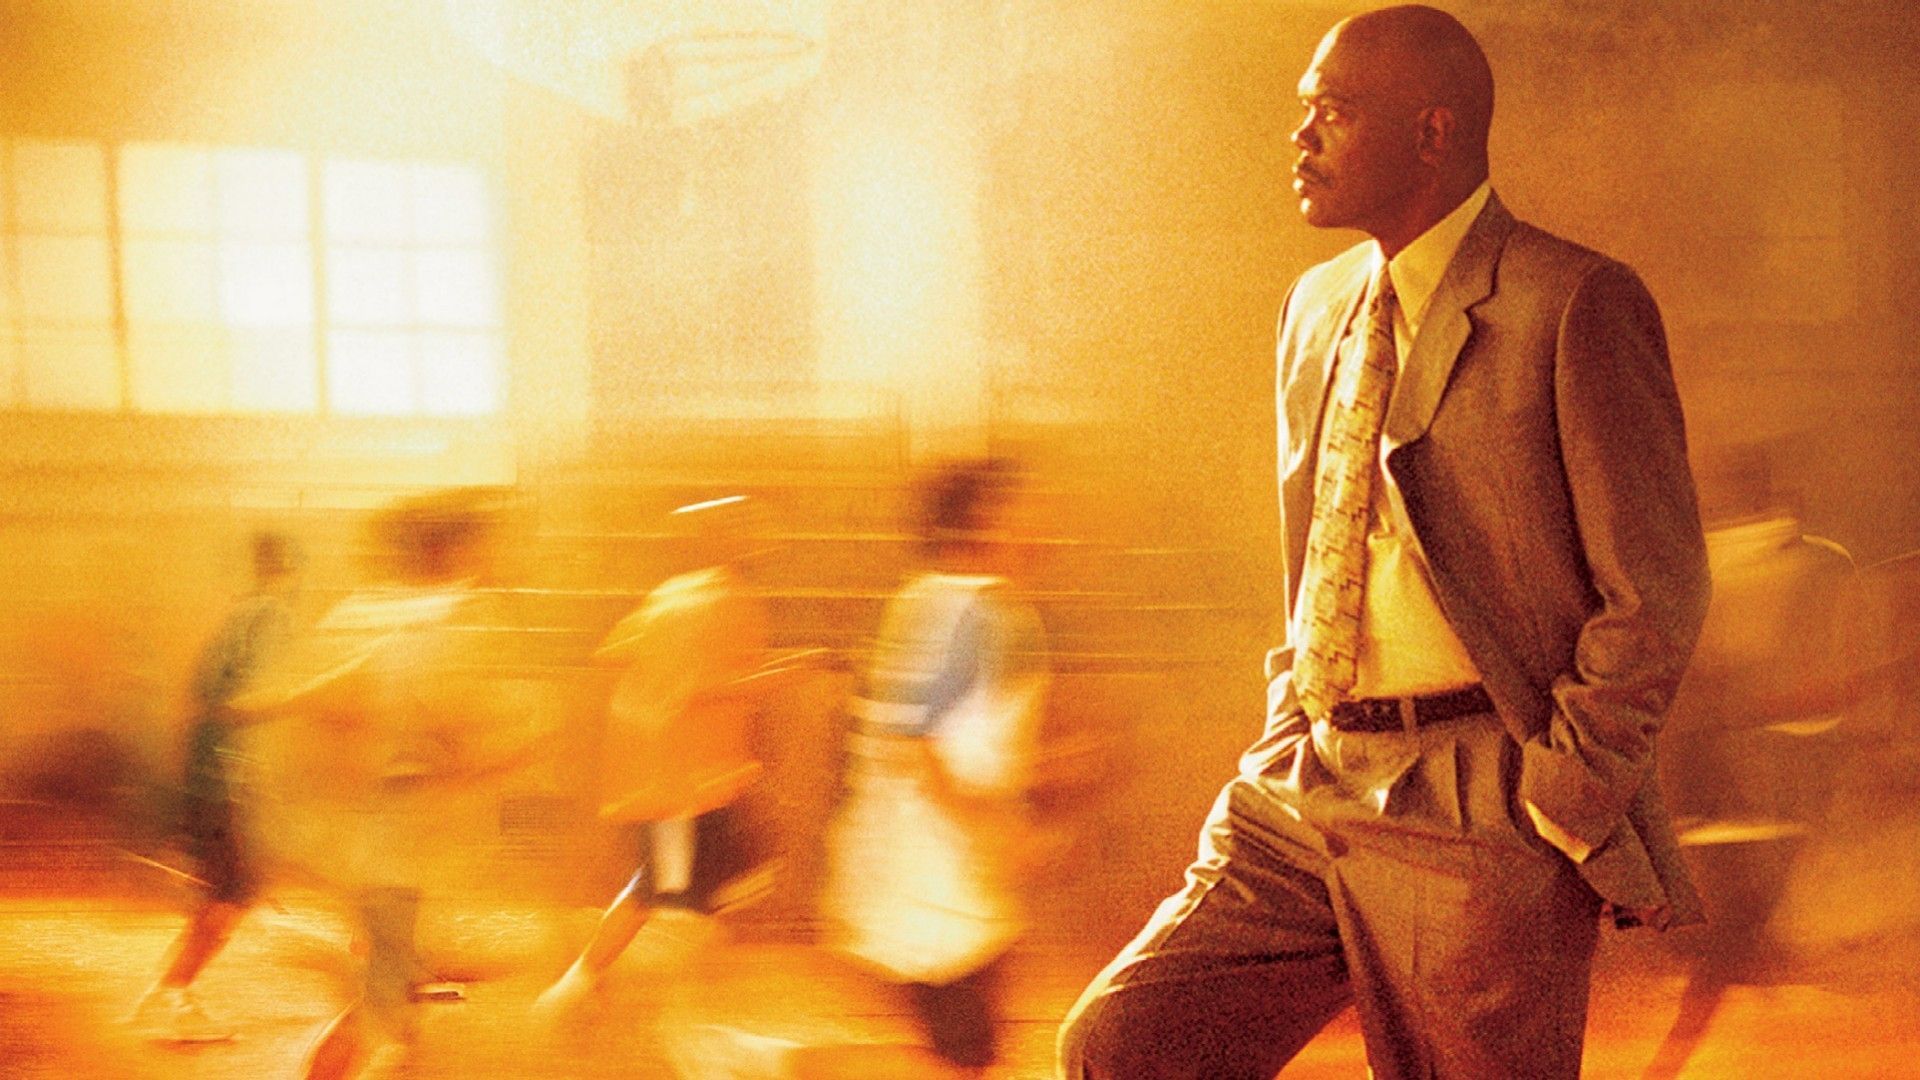 Coach Carter Wallpapers Wallpaper Cave 53466 Hot Sex Picture 